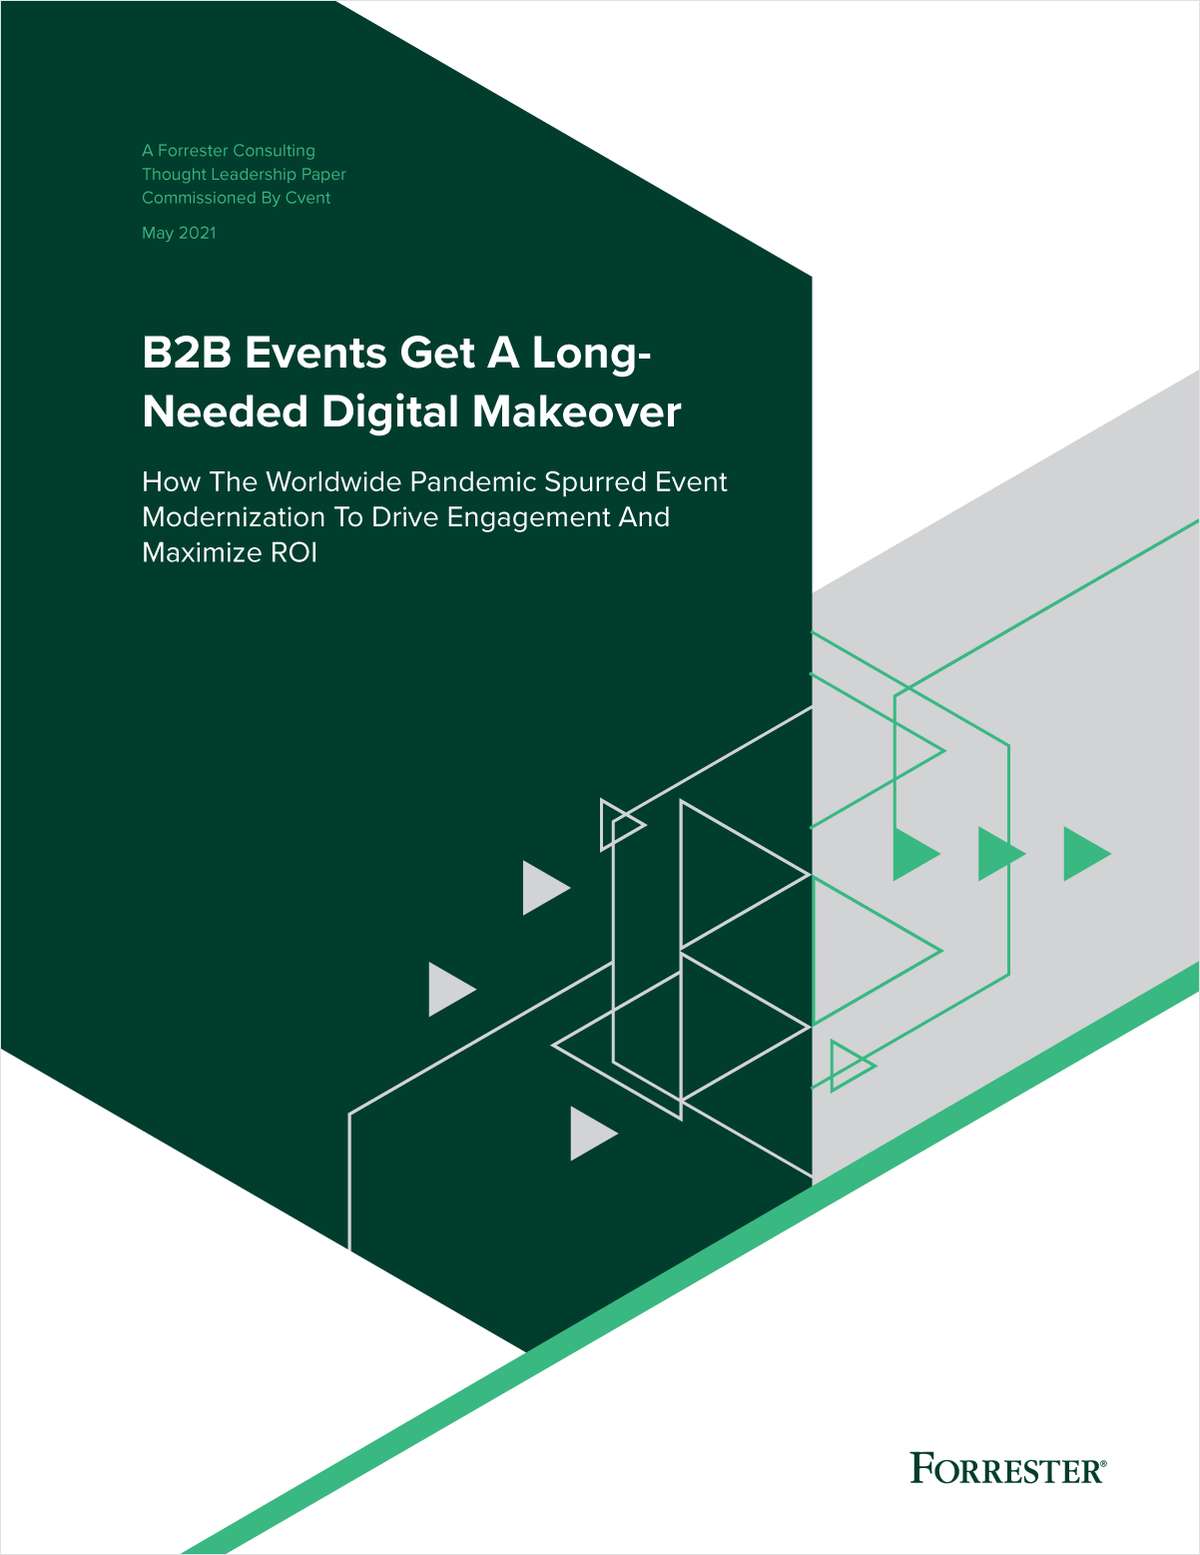 B2B Events Get A Long-Needed Digital Makeover